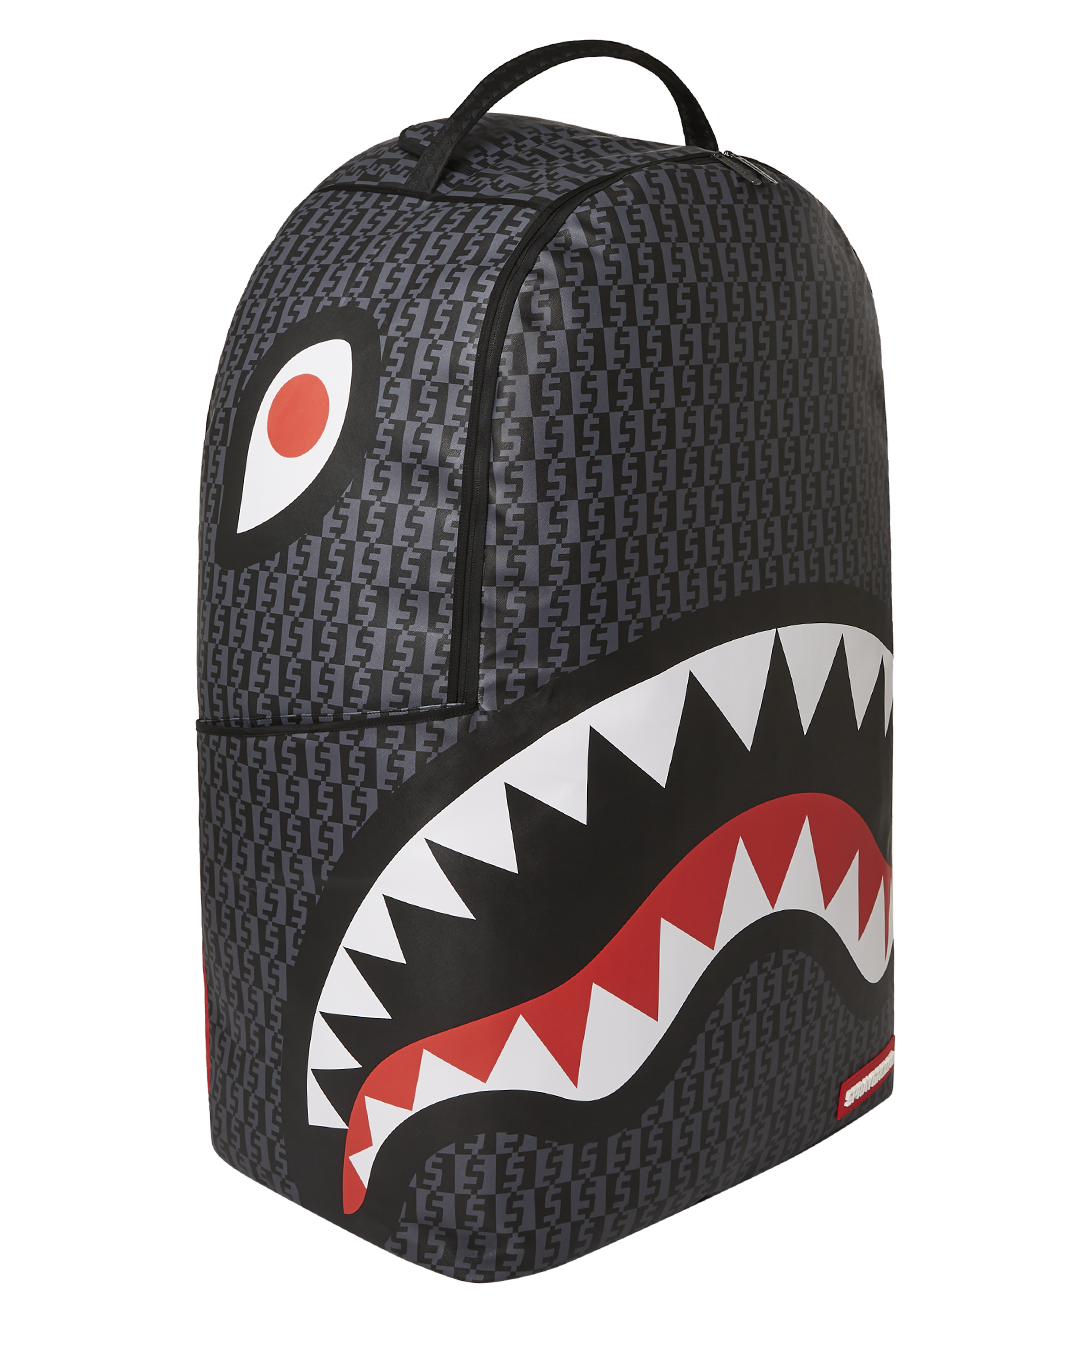 Sprayground, Bags, Selling A Spray Ground Backpack